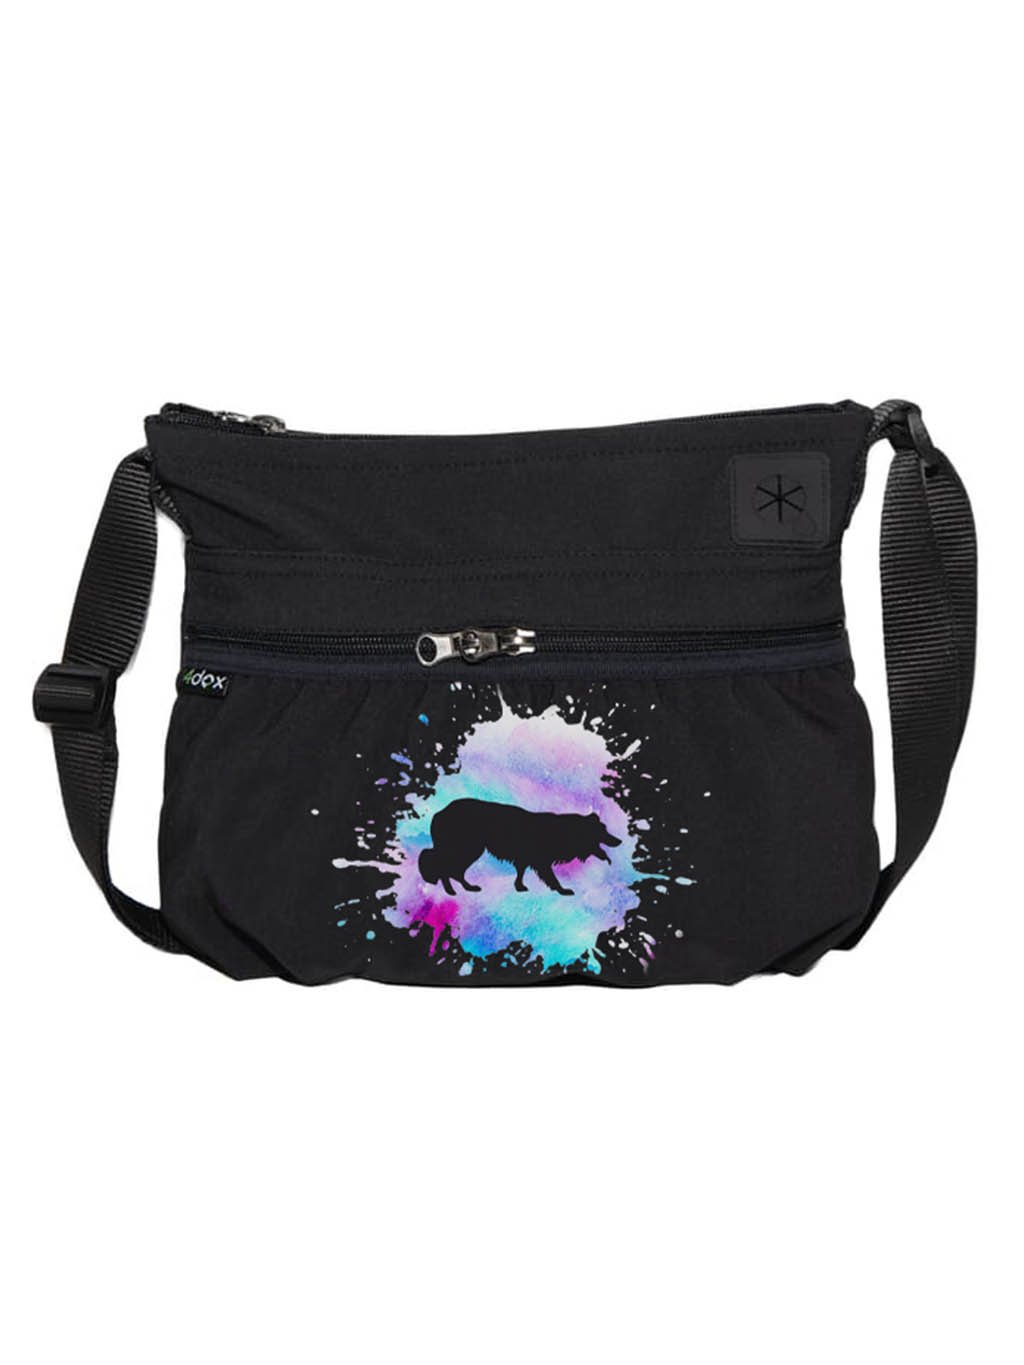 Training bag small Bordercollie longhaired BC2 4dox